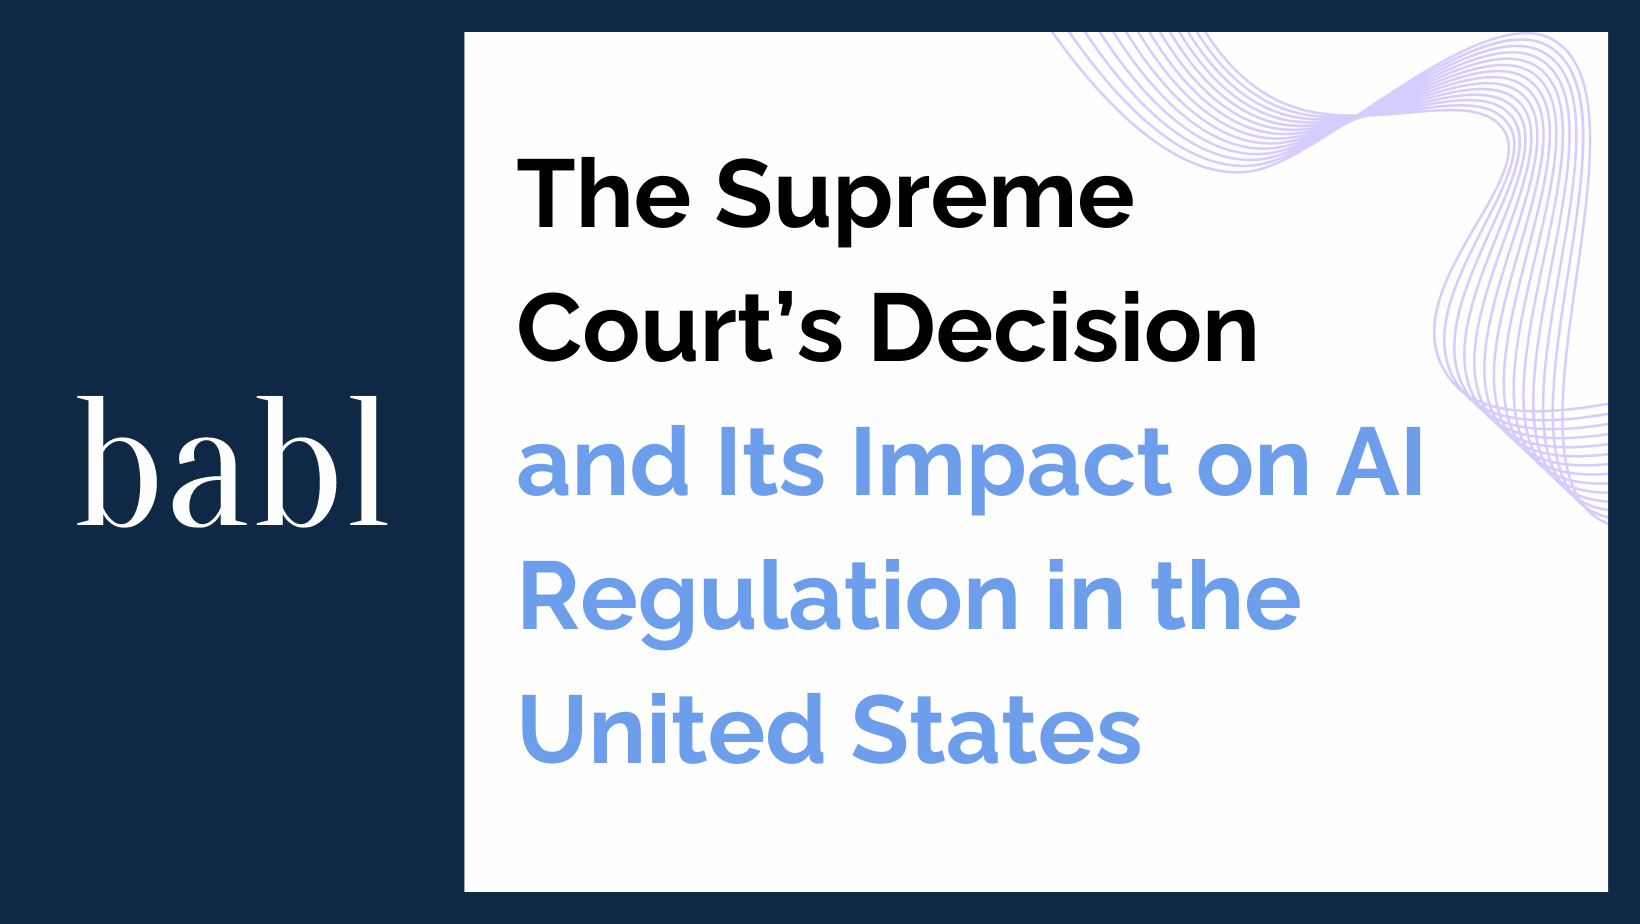 The Supreme Court’s Decision and Its Impact on AI Regulation in the United States